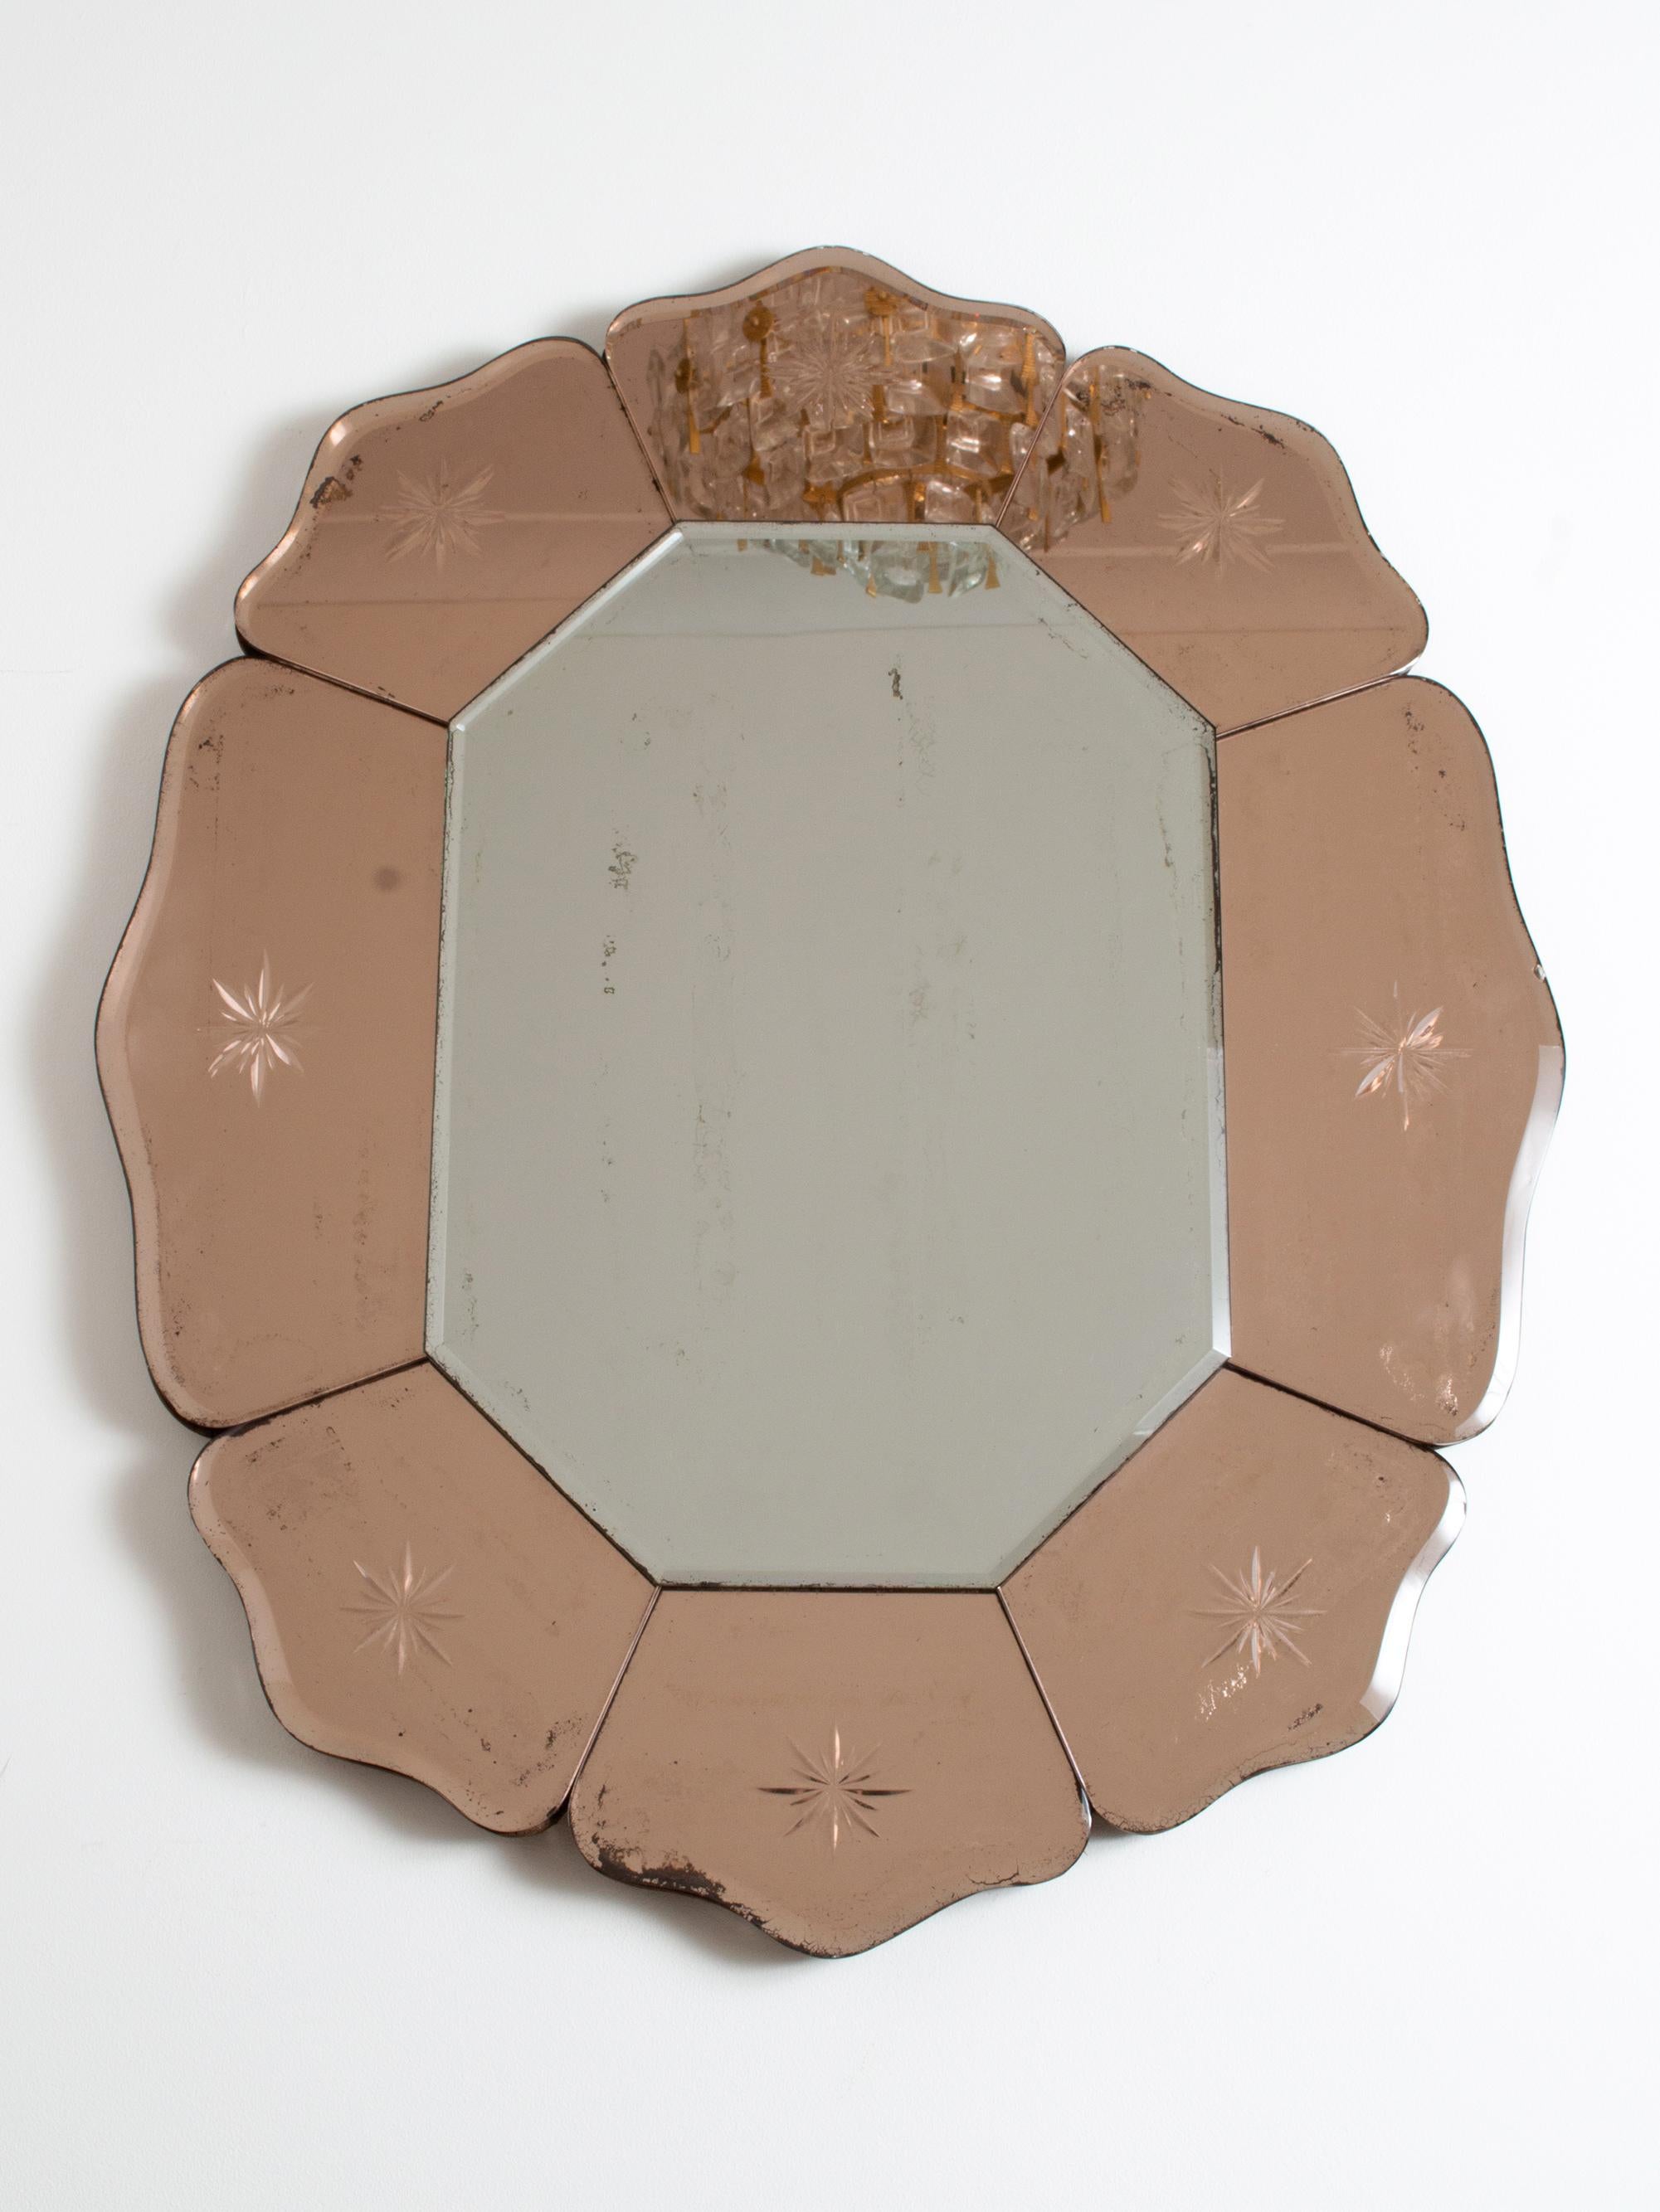 Original Art Deco flower shaped mirror rose glass tinted plates. France, circa 1930.
Beautiful natural foxing / loss of silvering to the glass plates, offering an attractive patination.